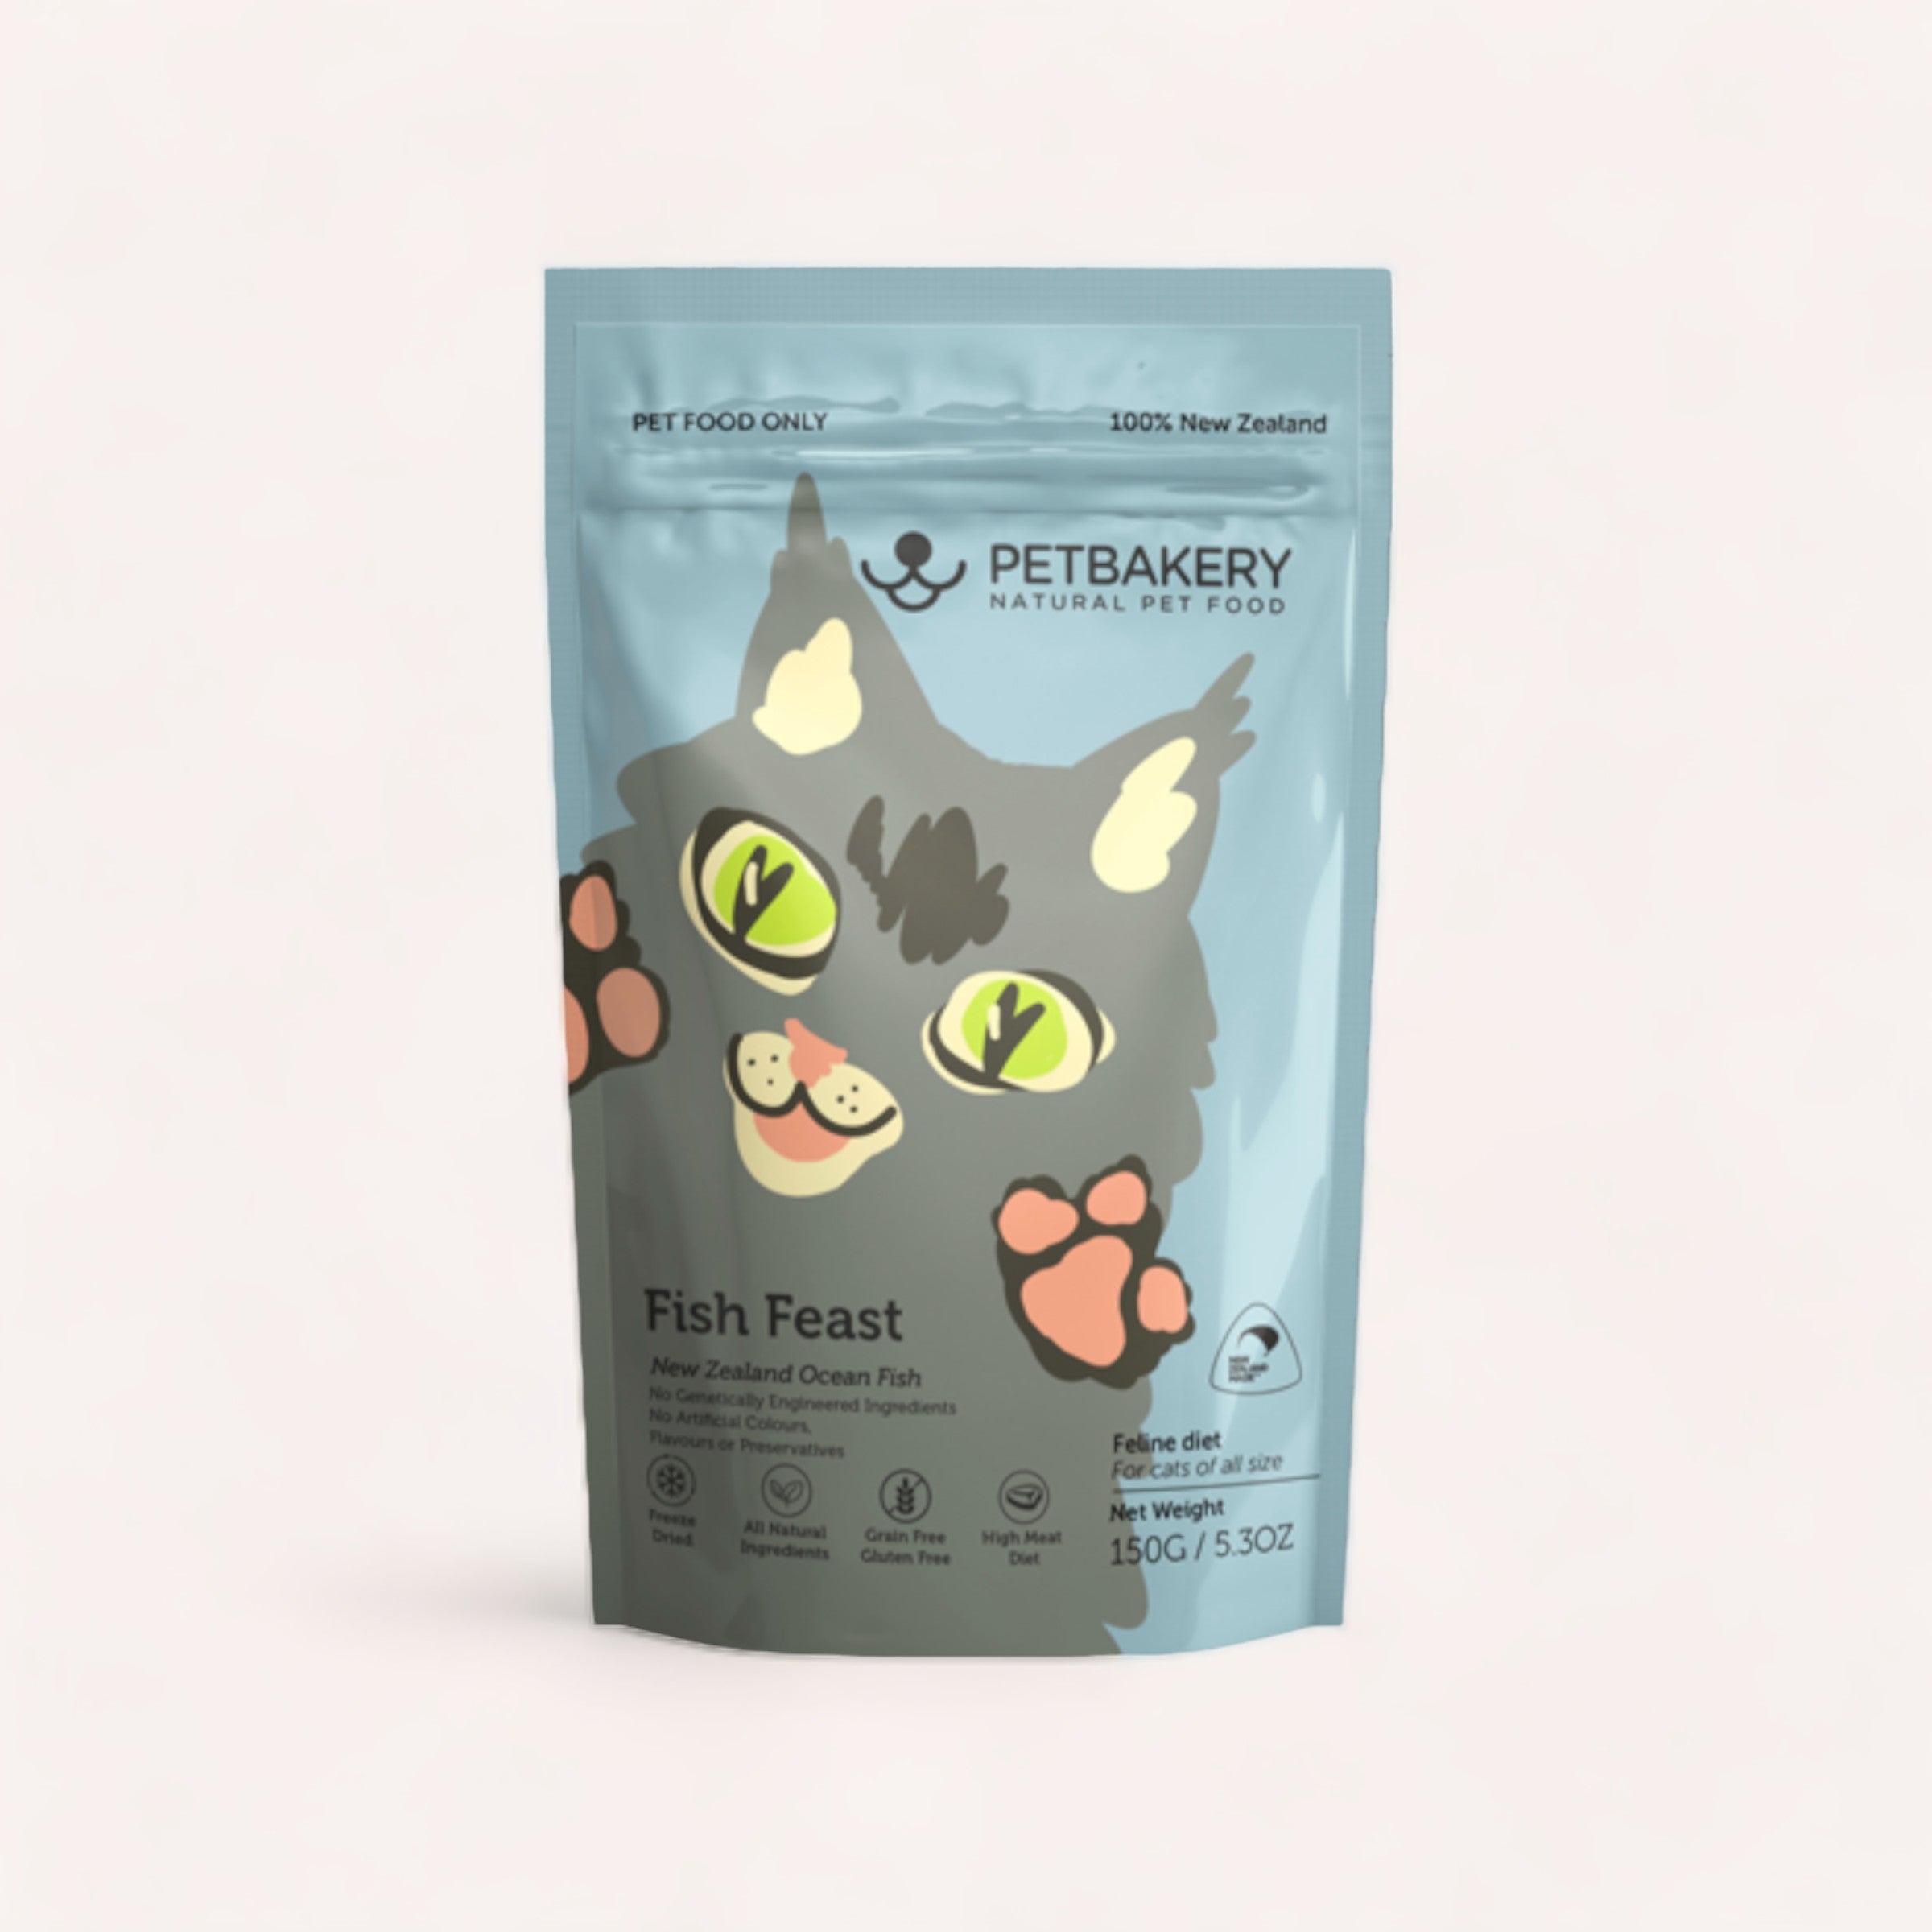 A package of "Fish Feast Treats by Petbakery" with an illustration of a cat's face and fish, highlighting New Zealand ocean fish as the ingredient, placed against a neutral background.